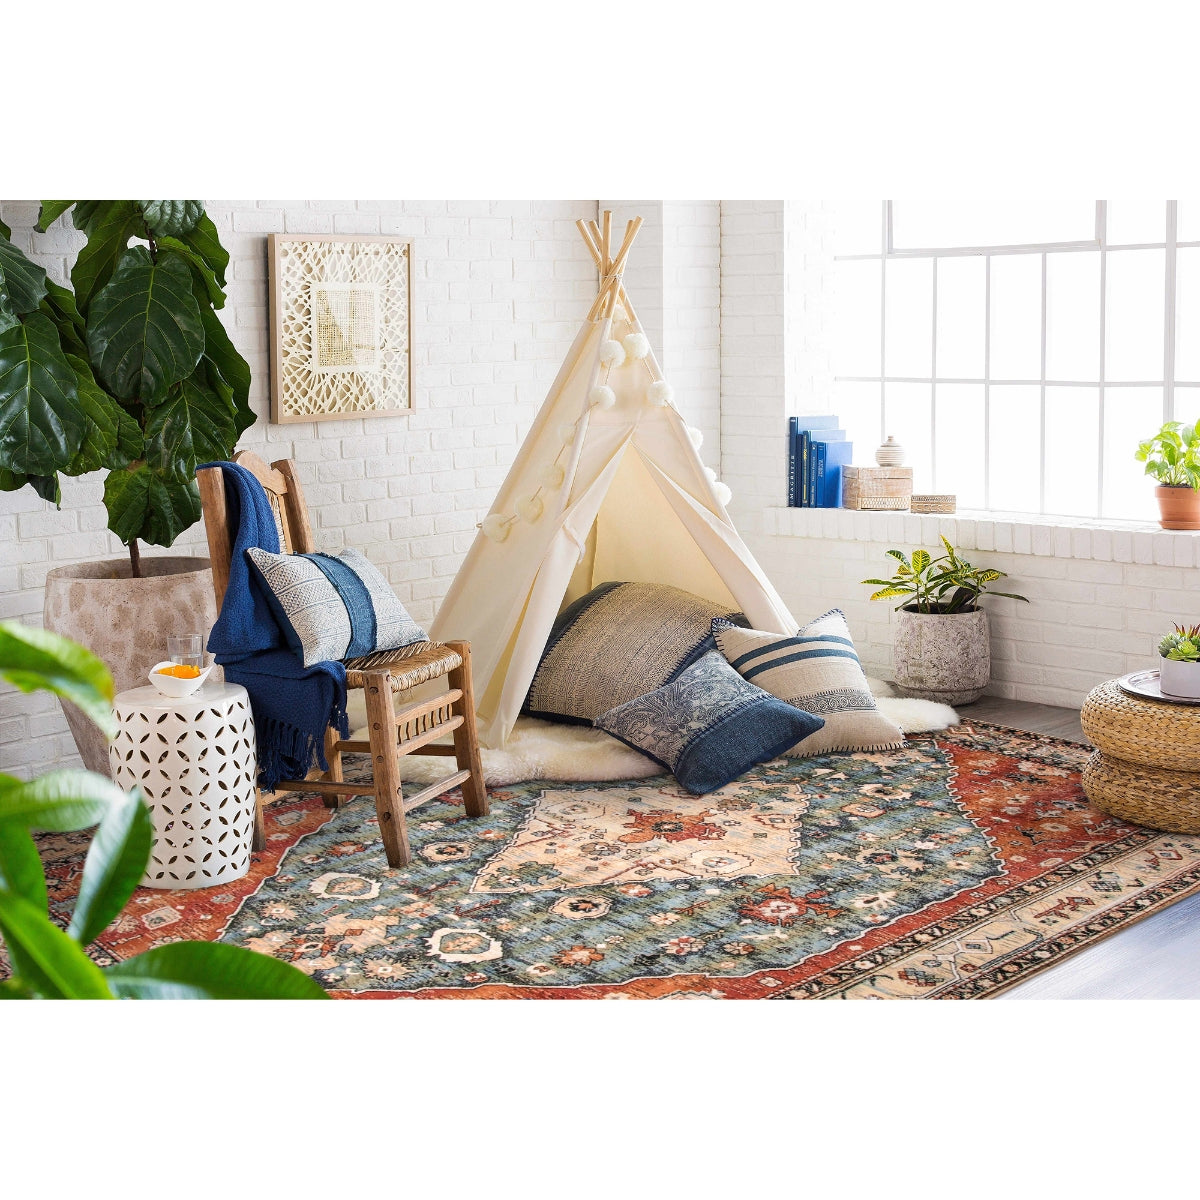 The Best Affordable Boho Area Rugs from Loloi - Sprucing Up Mamahood